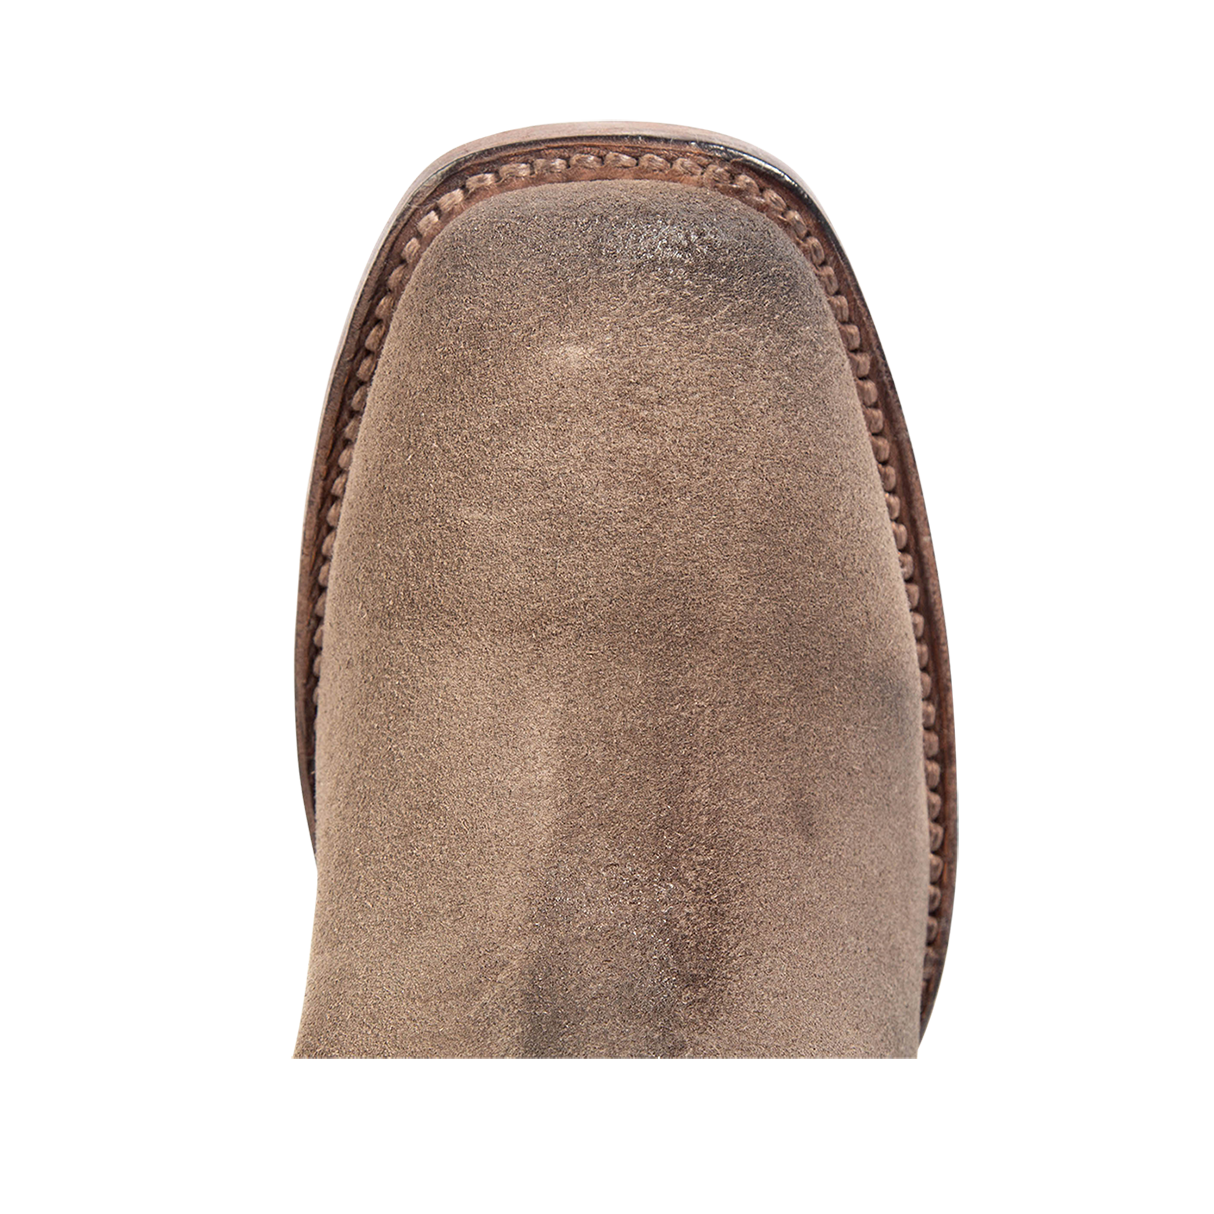 Top view showing square toe on FREEBIRD womens Daisy taupe tall boot